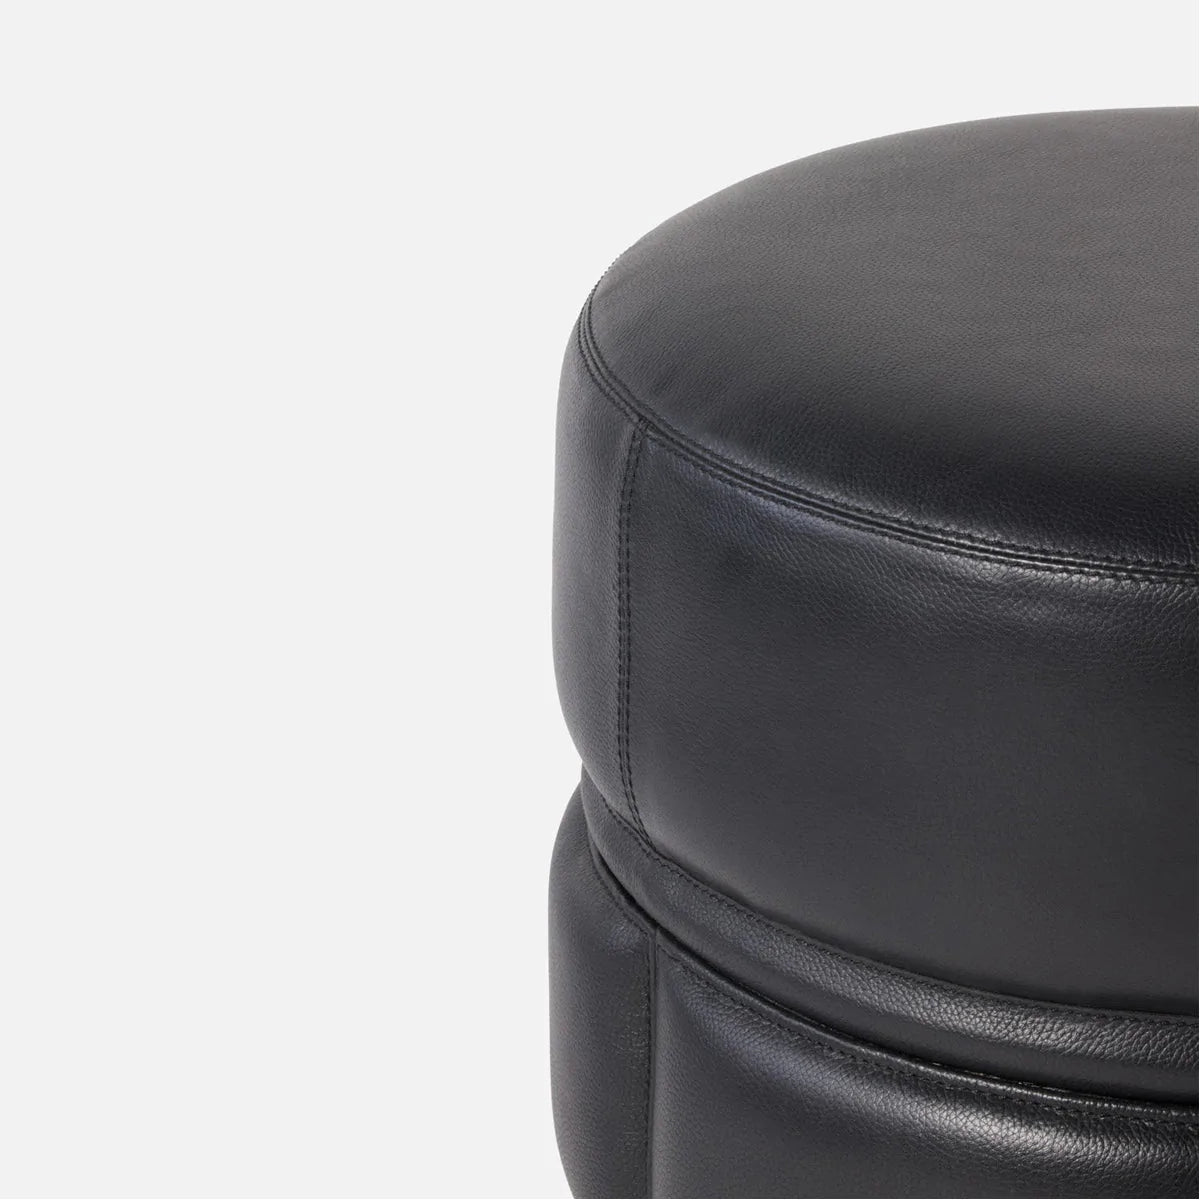 Made Goods Vaughn Round Ribbed Leather Stool